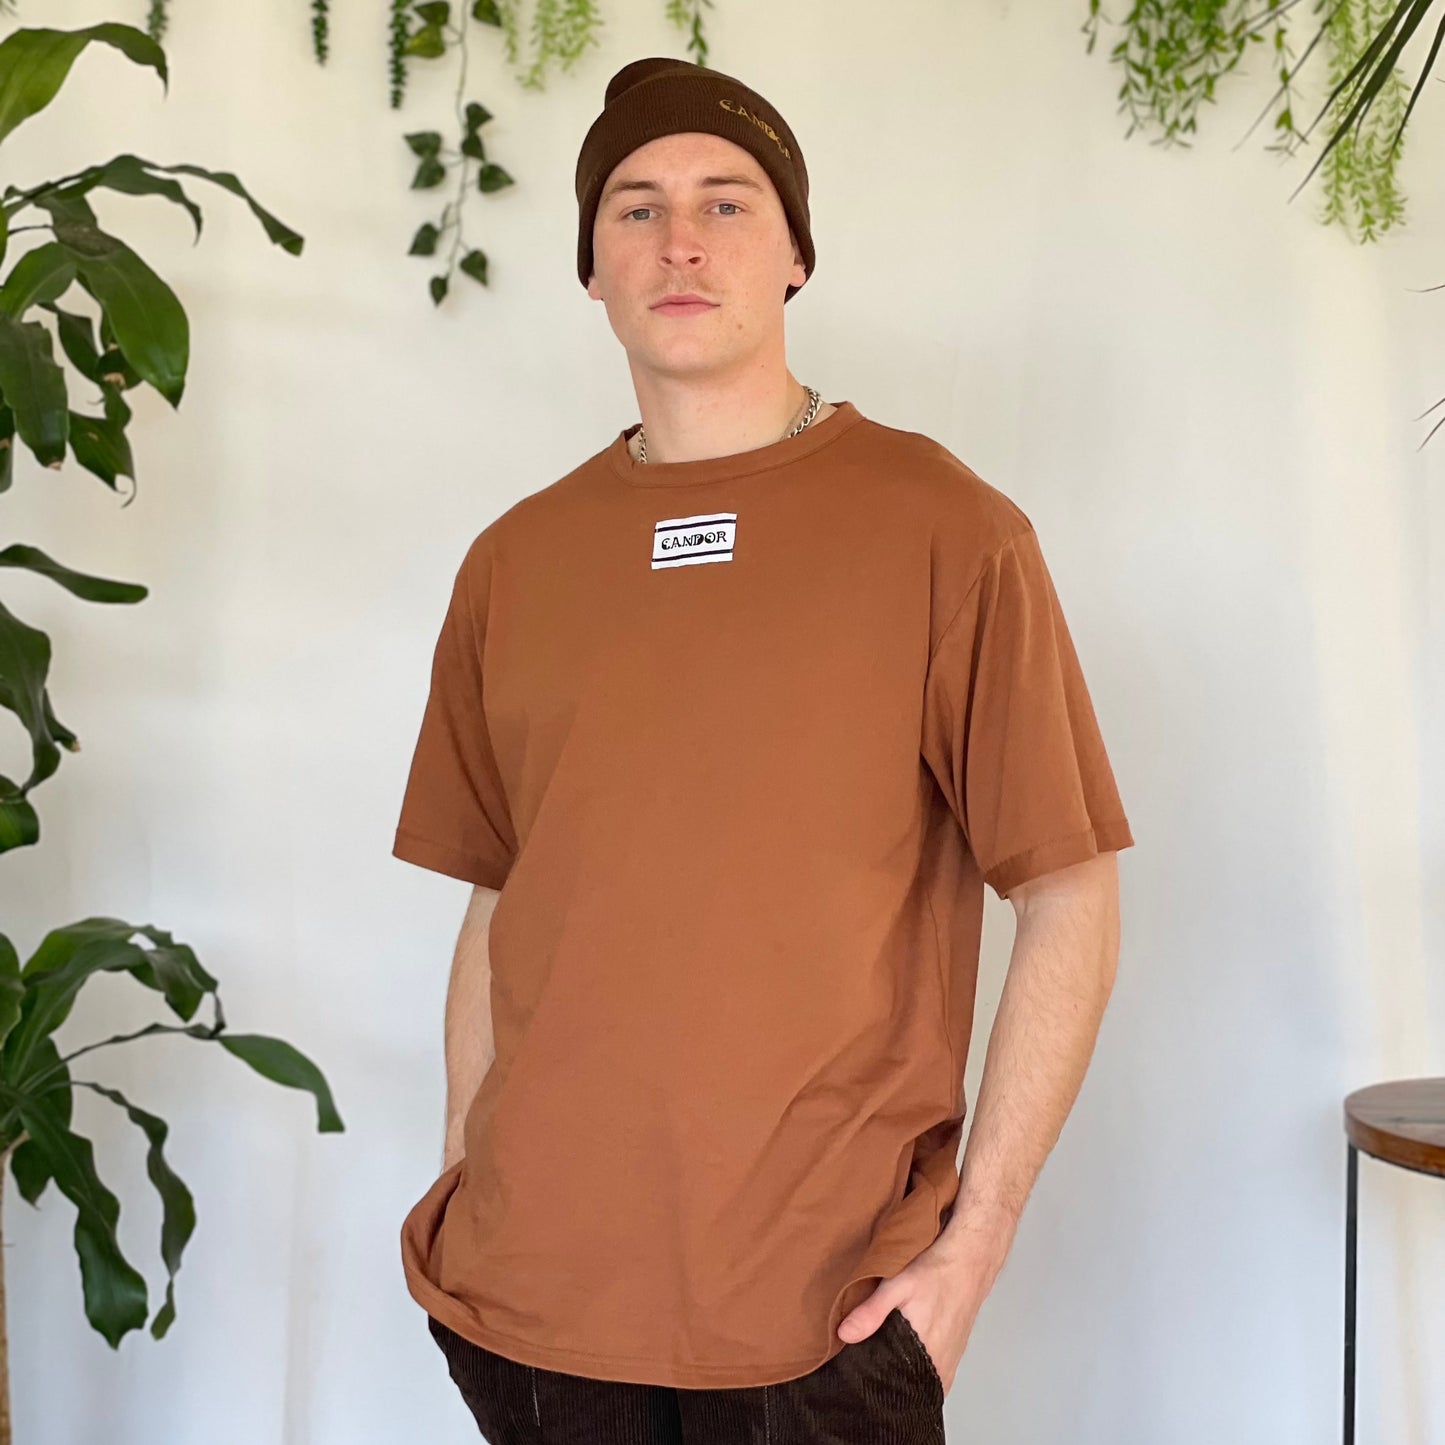 Models wears light brown t-shirt with Candor label, brown Candor beanie and brown corduroy pants with hands in pockets. Model stands against a white backdrop with plants and hanging foliage.